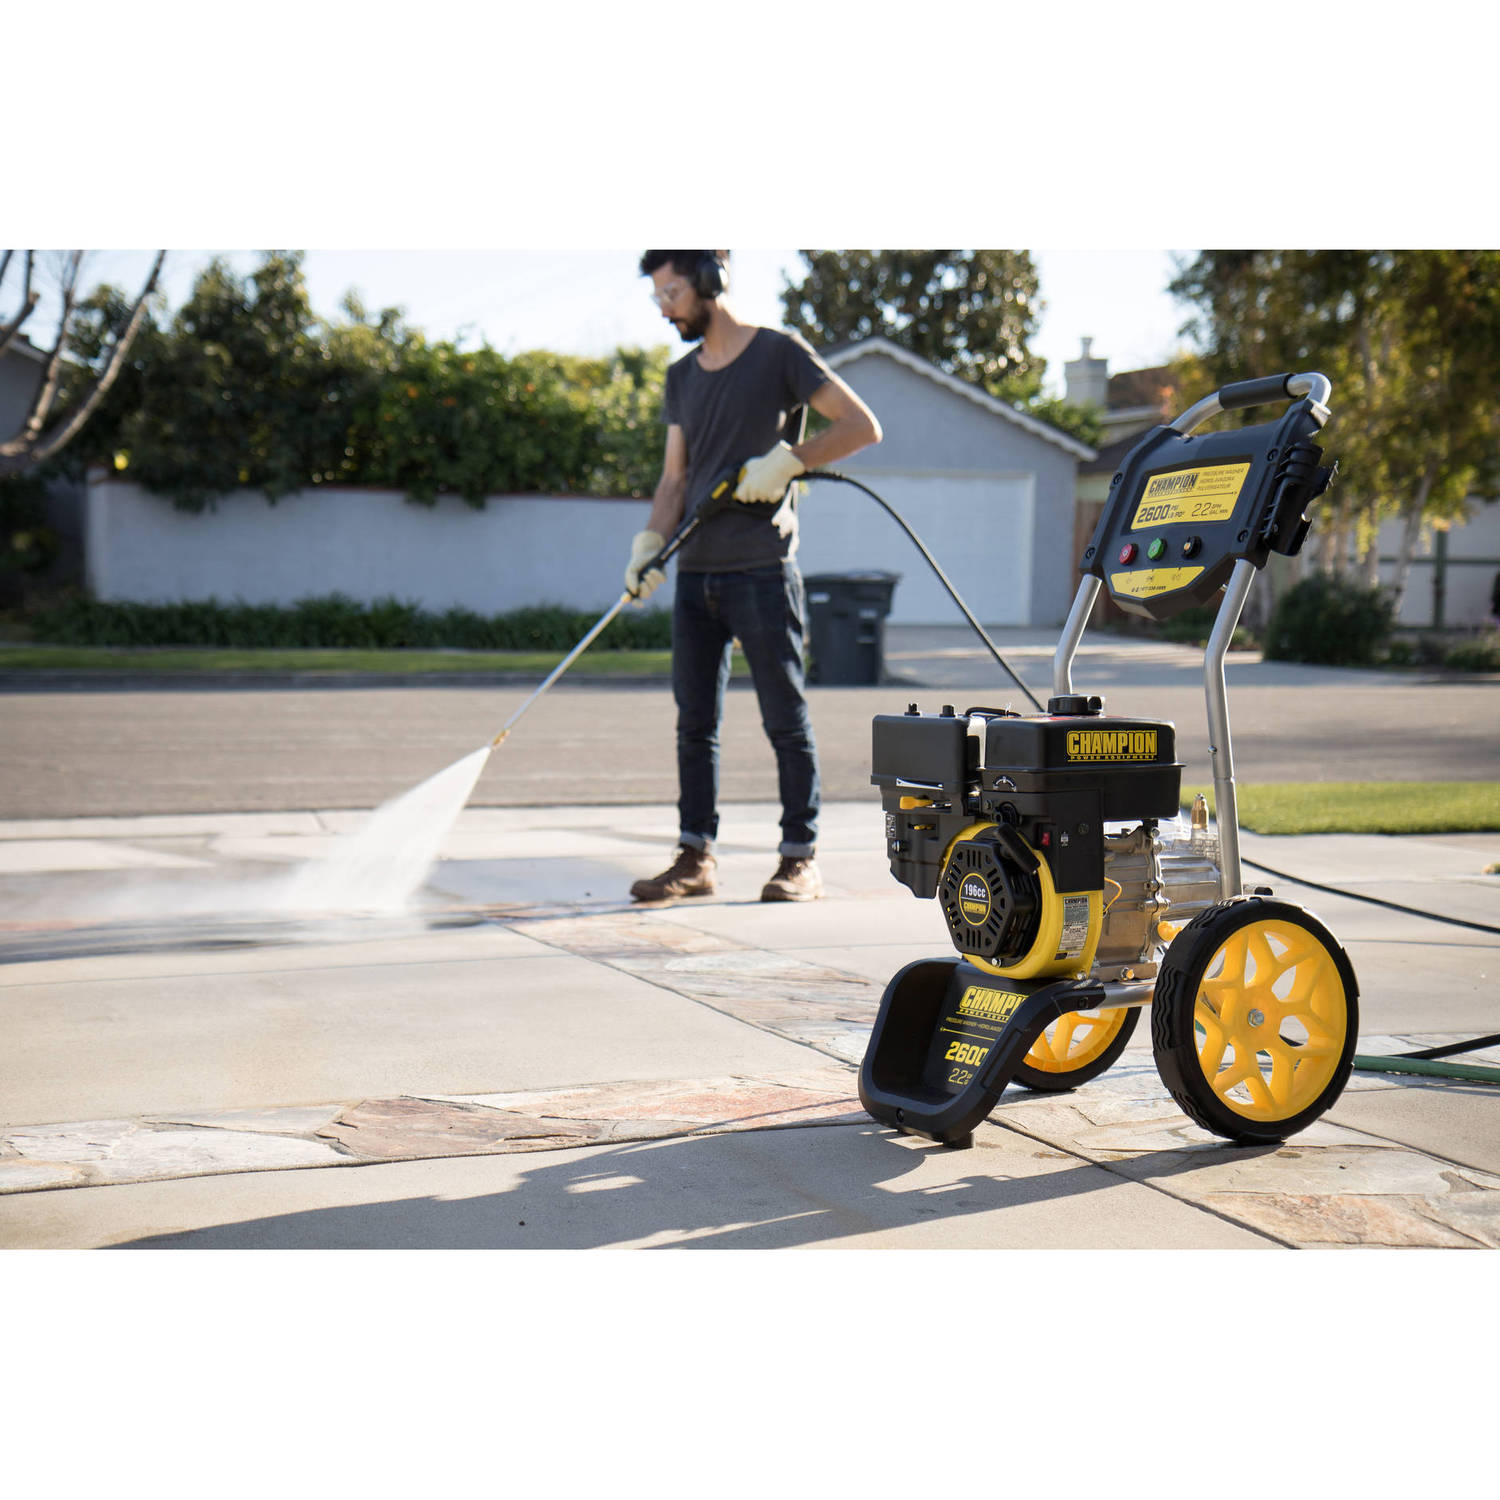 Champion 2600-PSI 2.2-GPM Dolly-Style Gas Pressure Washer - image 3 of 7